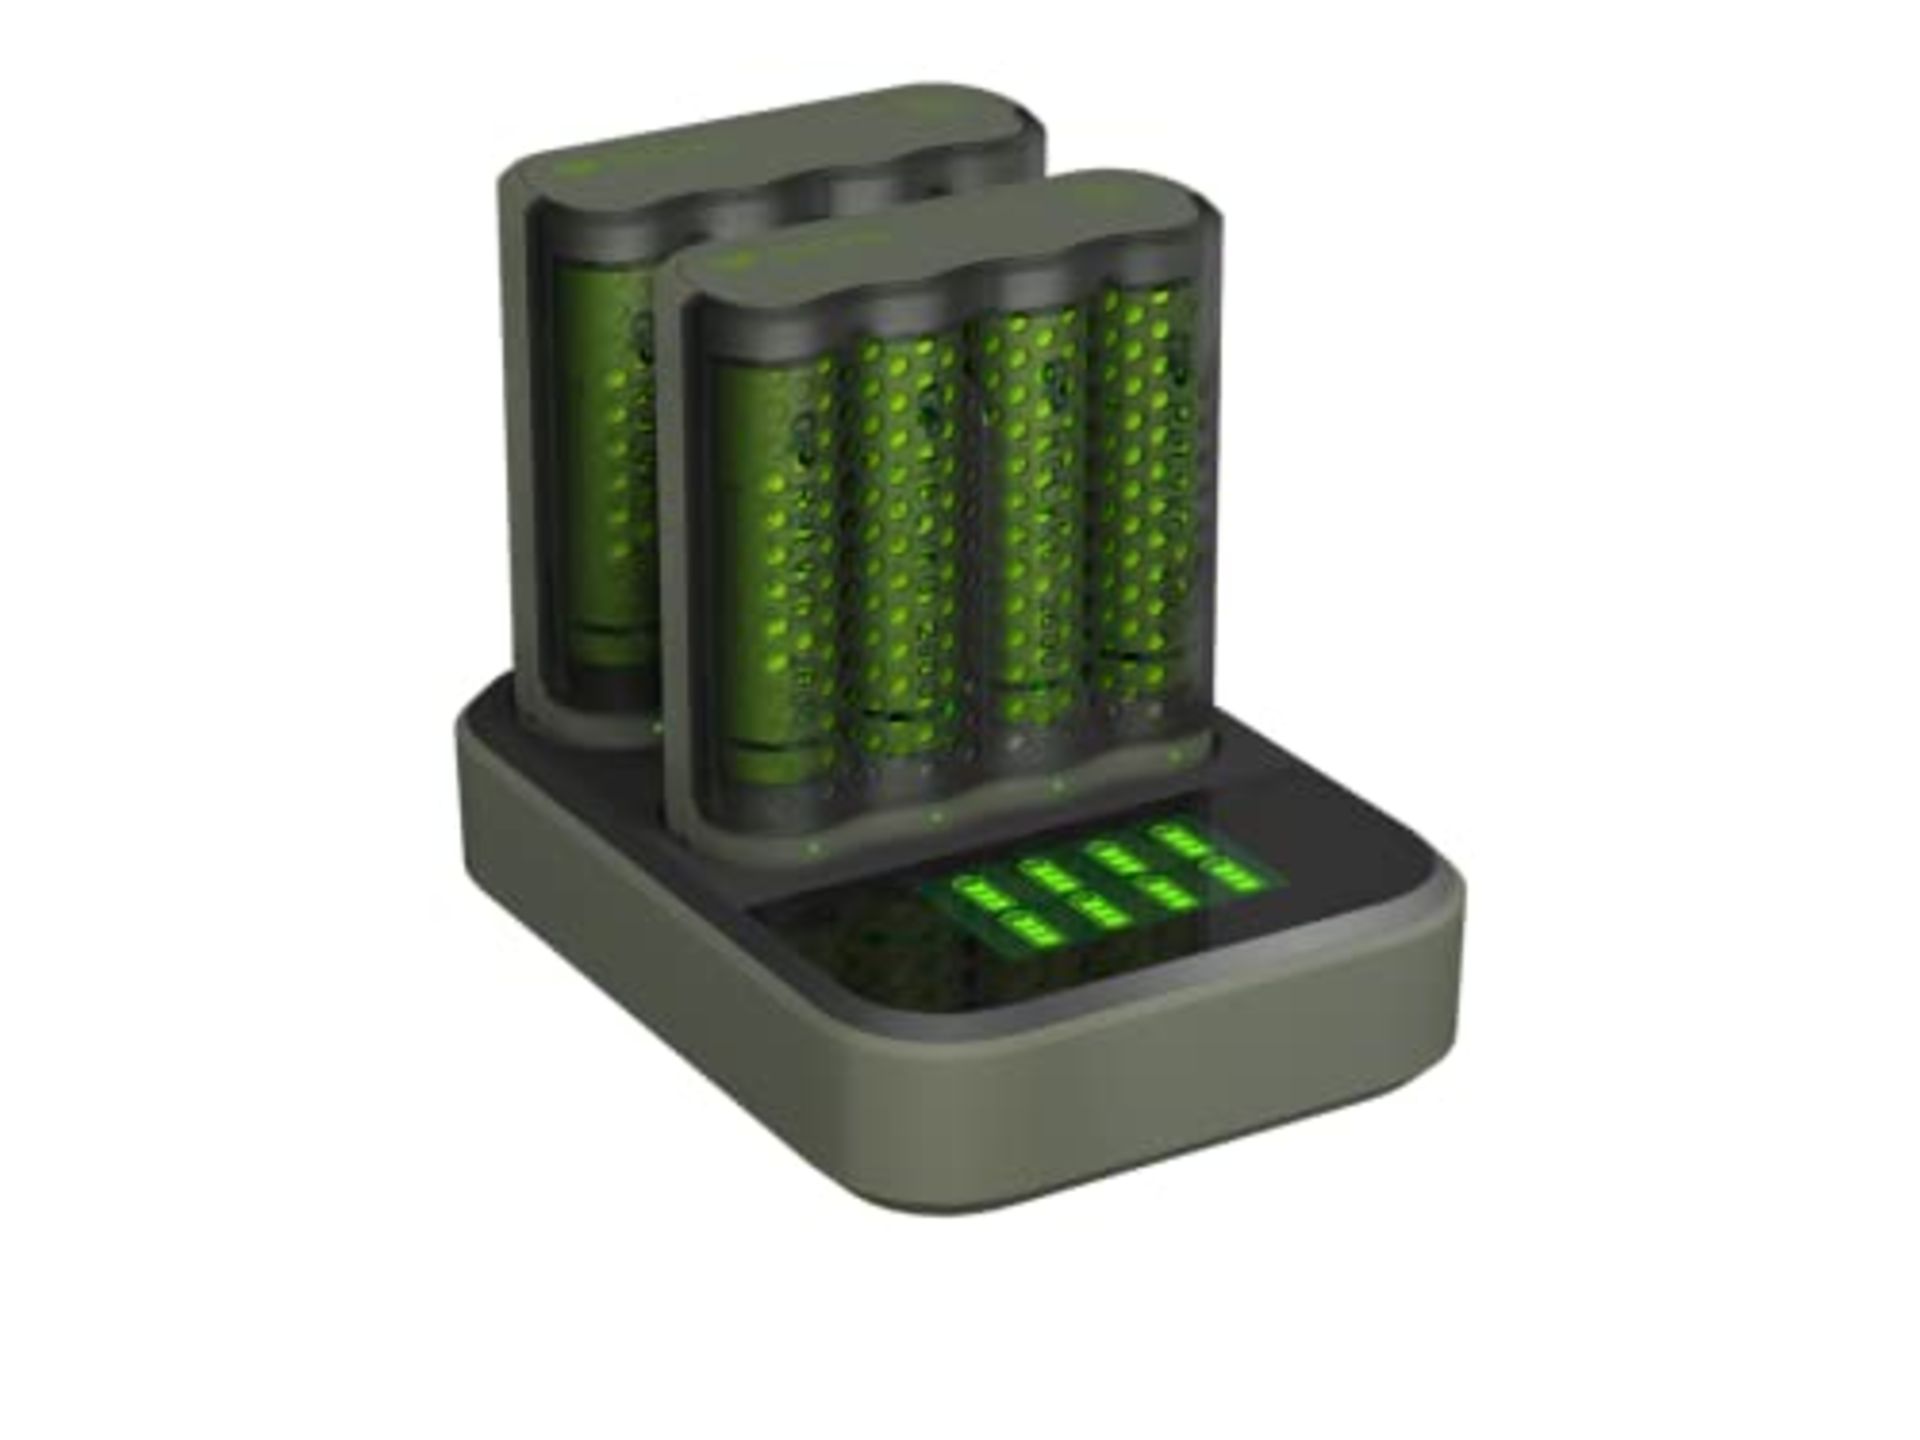 Quick USB Charger with 8 Rechargeable AA Batteries 2600 mAh included and LED display |